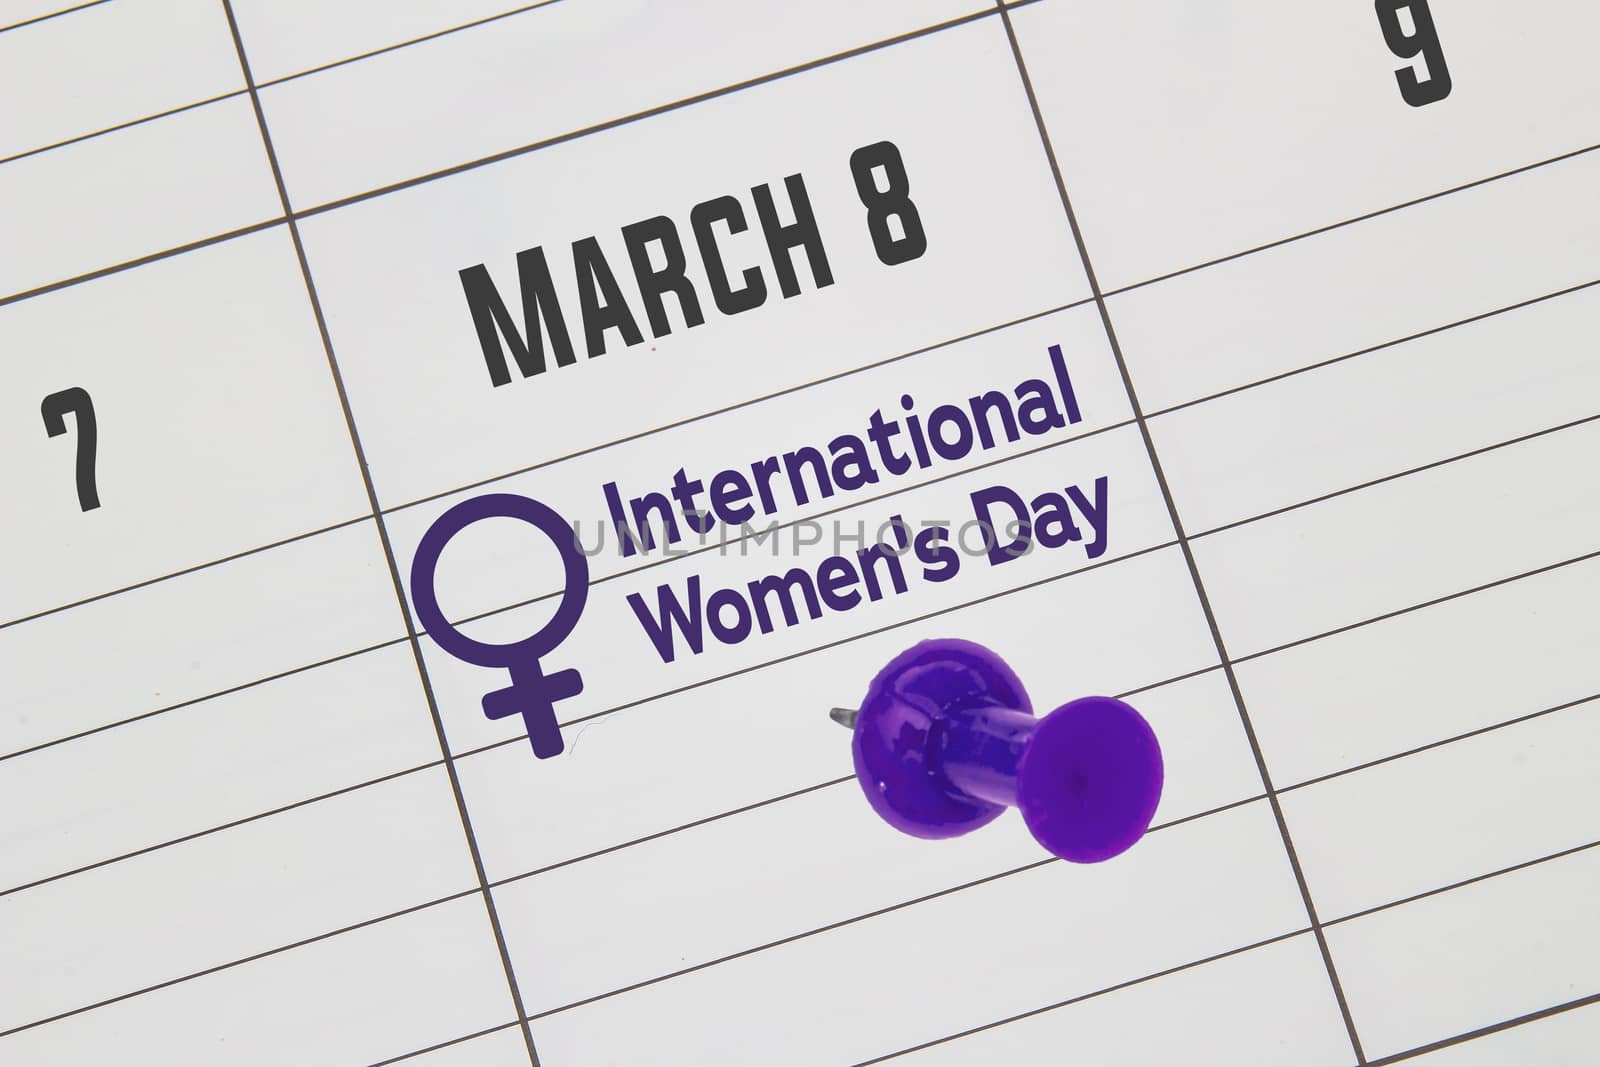 A close up to a Calendar on March 8 with the text: International Women's Day with a purple pin by oasisamuel